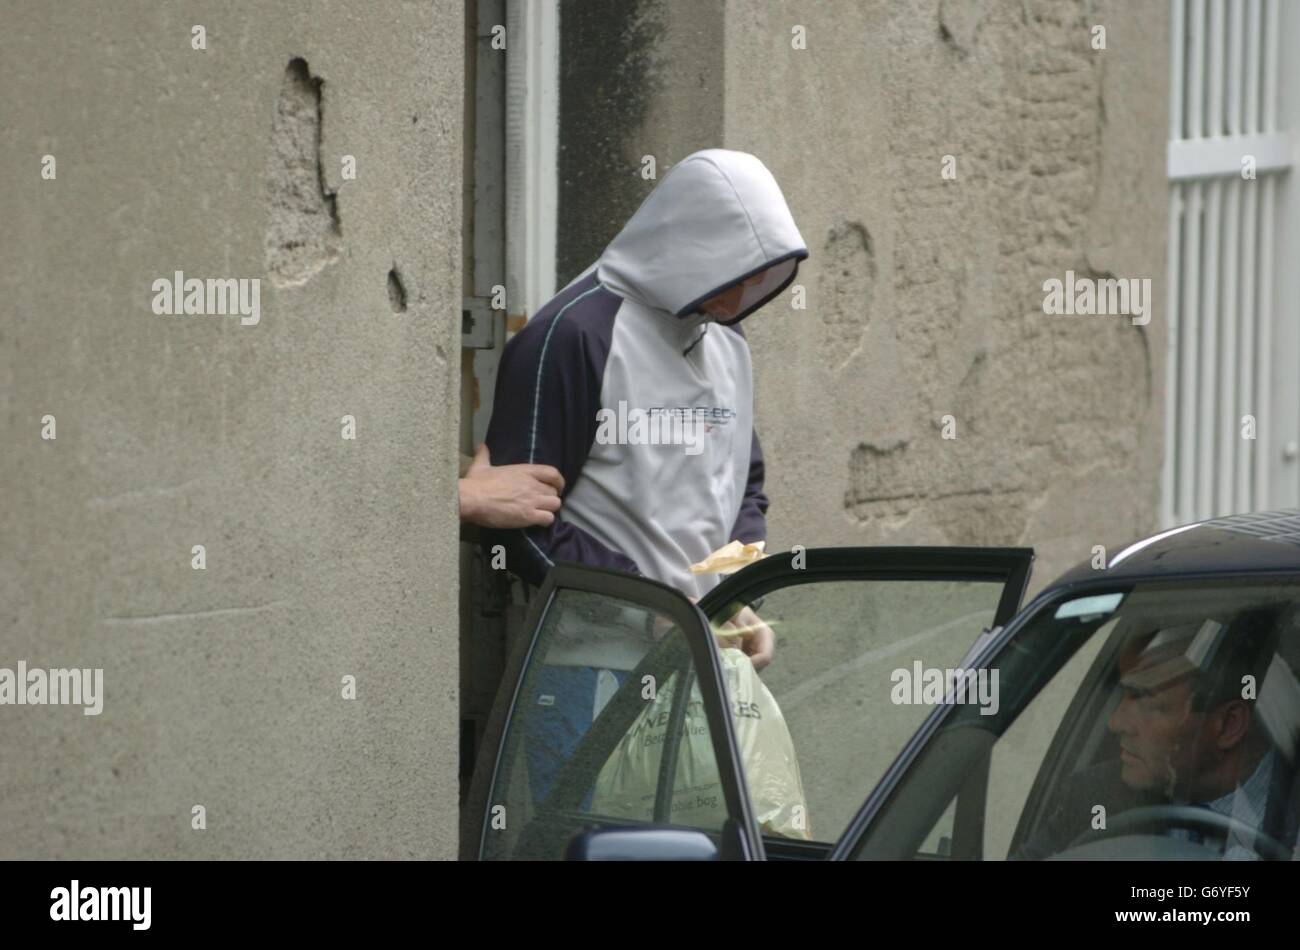 Thomas Hinchon, 24, leaving Kilmainham District Court, where he and Brian Kenny, 34, were charged with murder of Jonathan O'Reilly, who was shot outside Dublin's Cloverhill prison on April 17. O'Reilly had recently been released from jail after serving a five year sentence for drugs offences and was involved with a well-known Dublin drug-dealing gang. Stock Photo